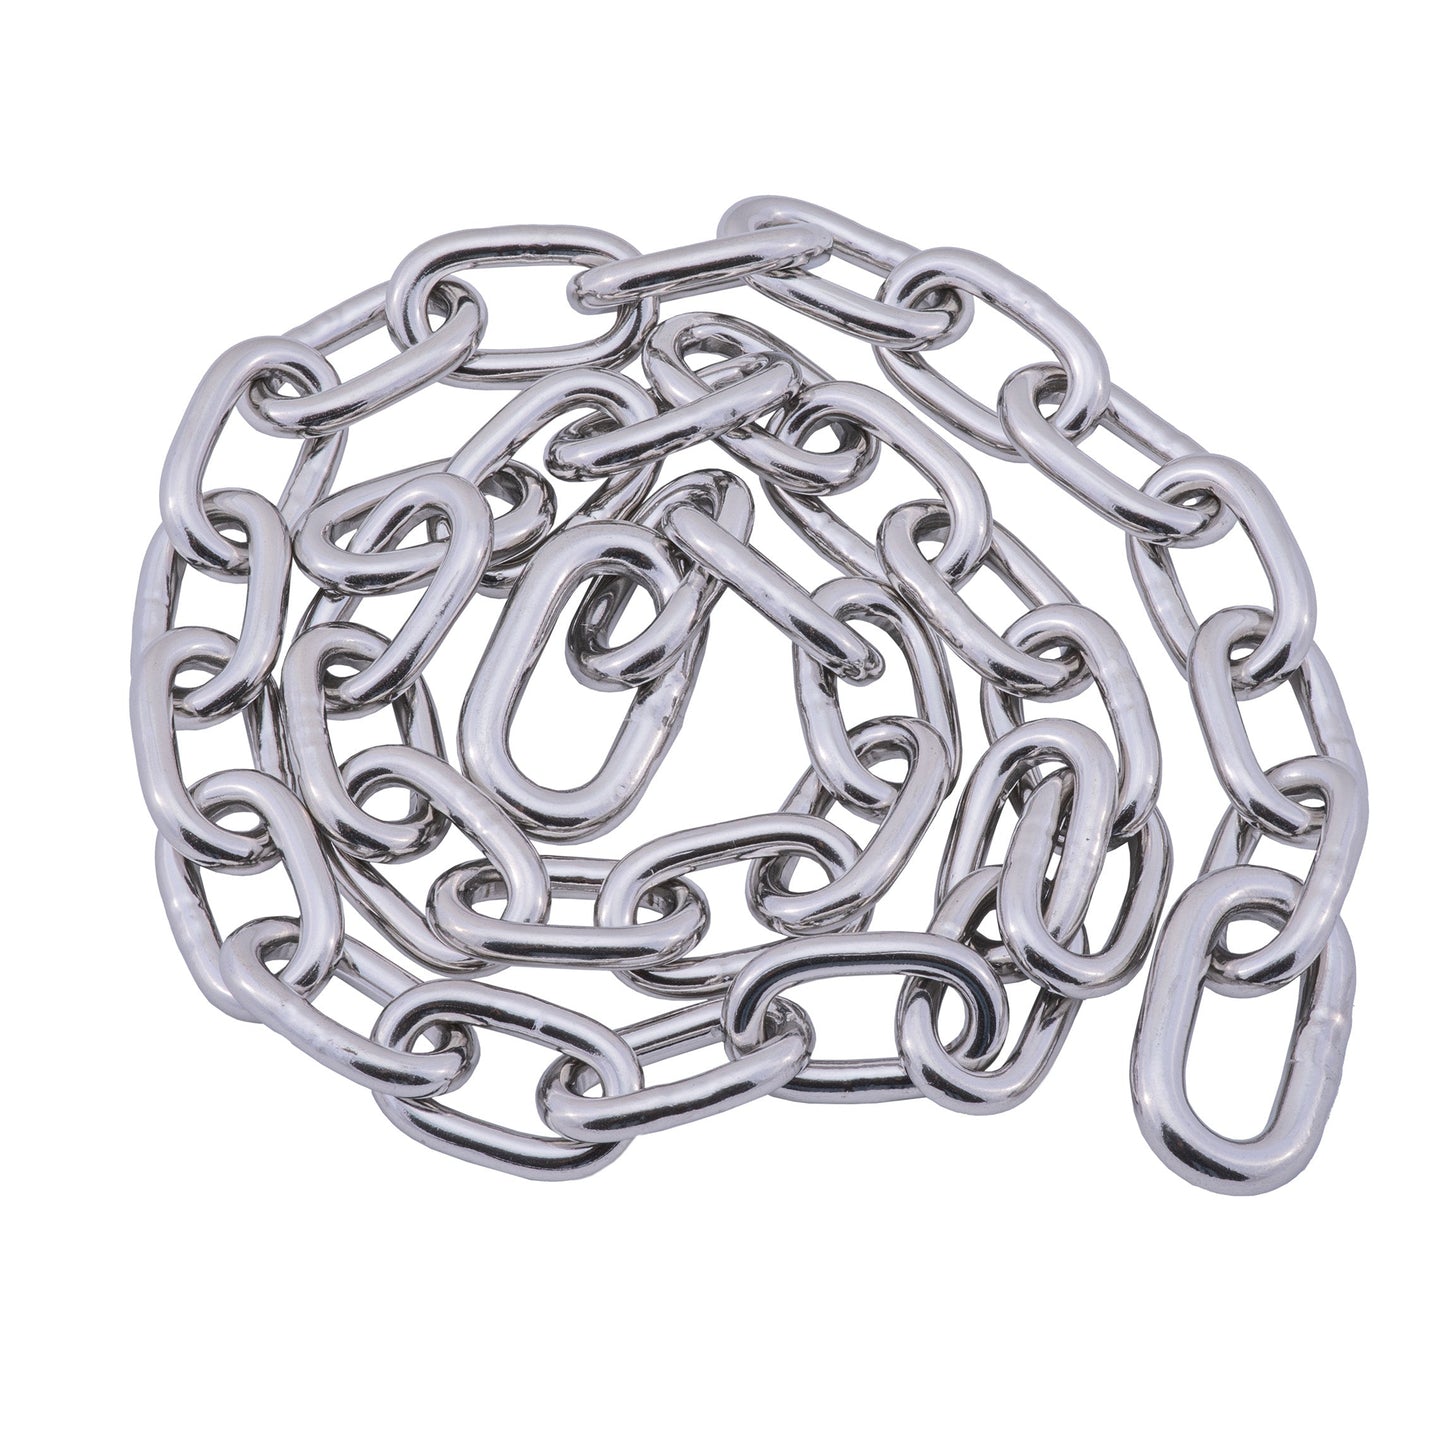 5' 316 Stainless Steel Anchor Chain with 5/16" Chain Link